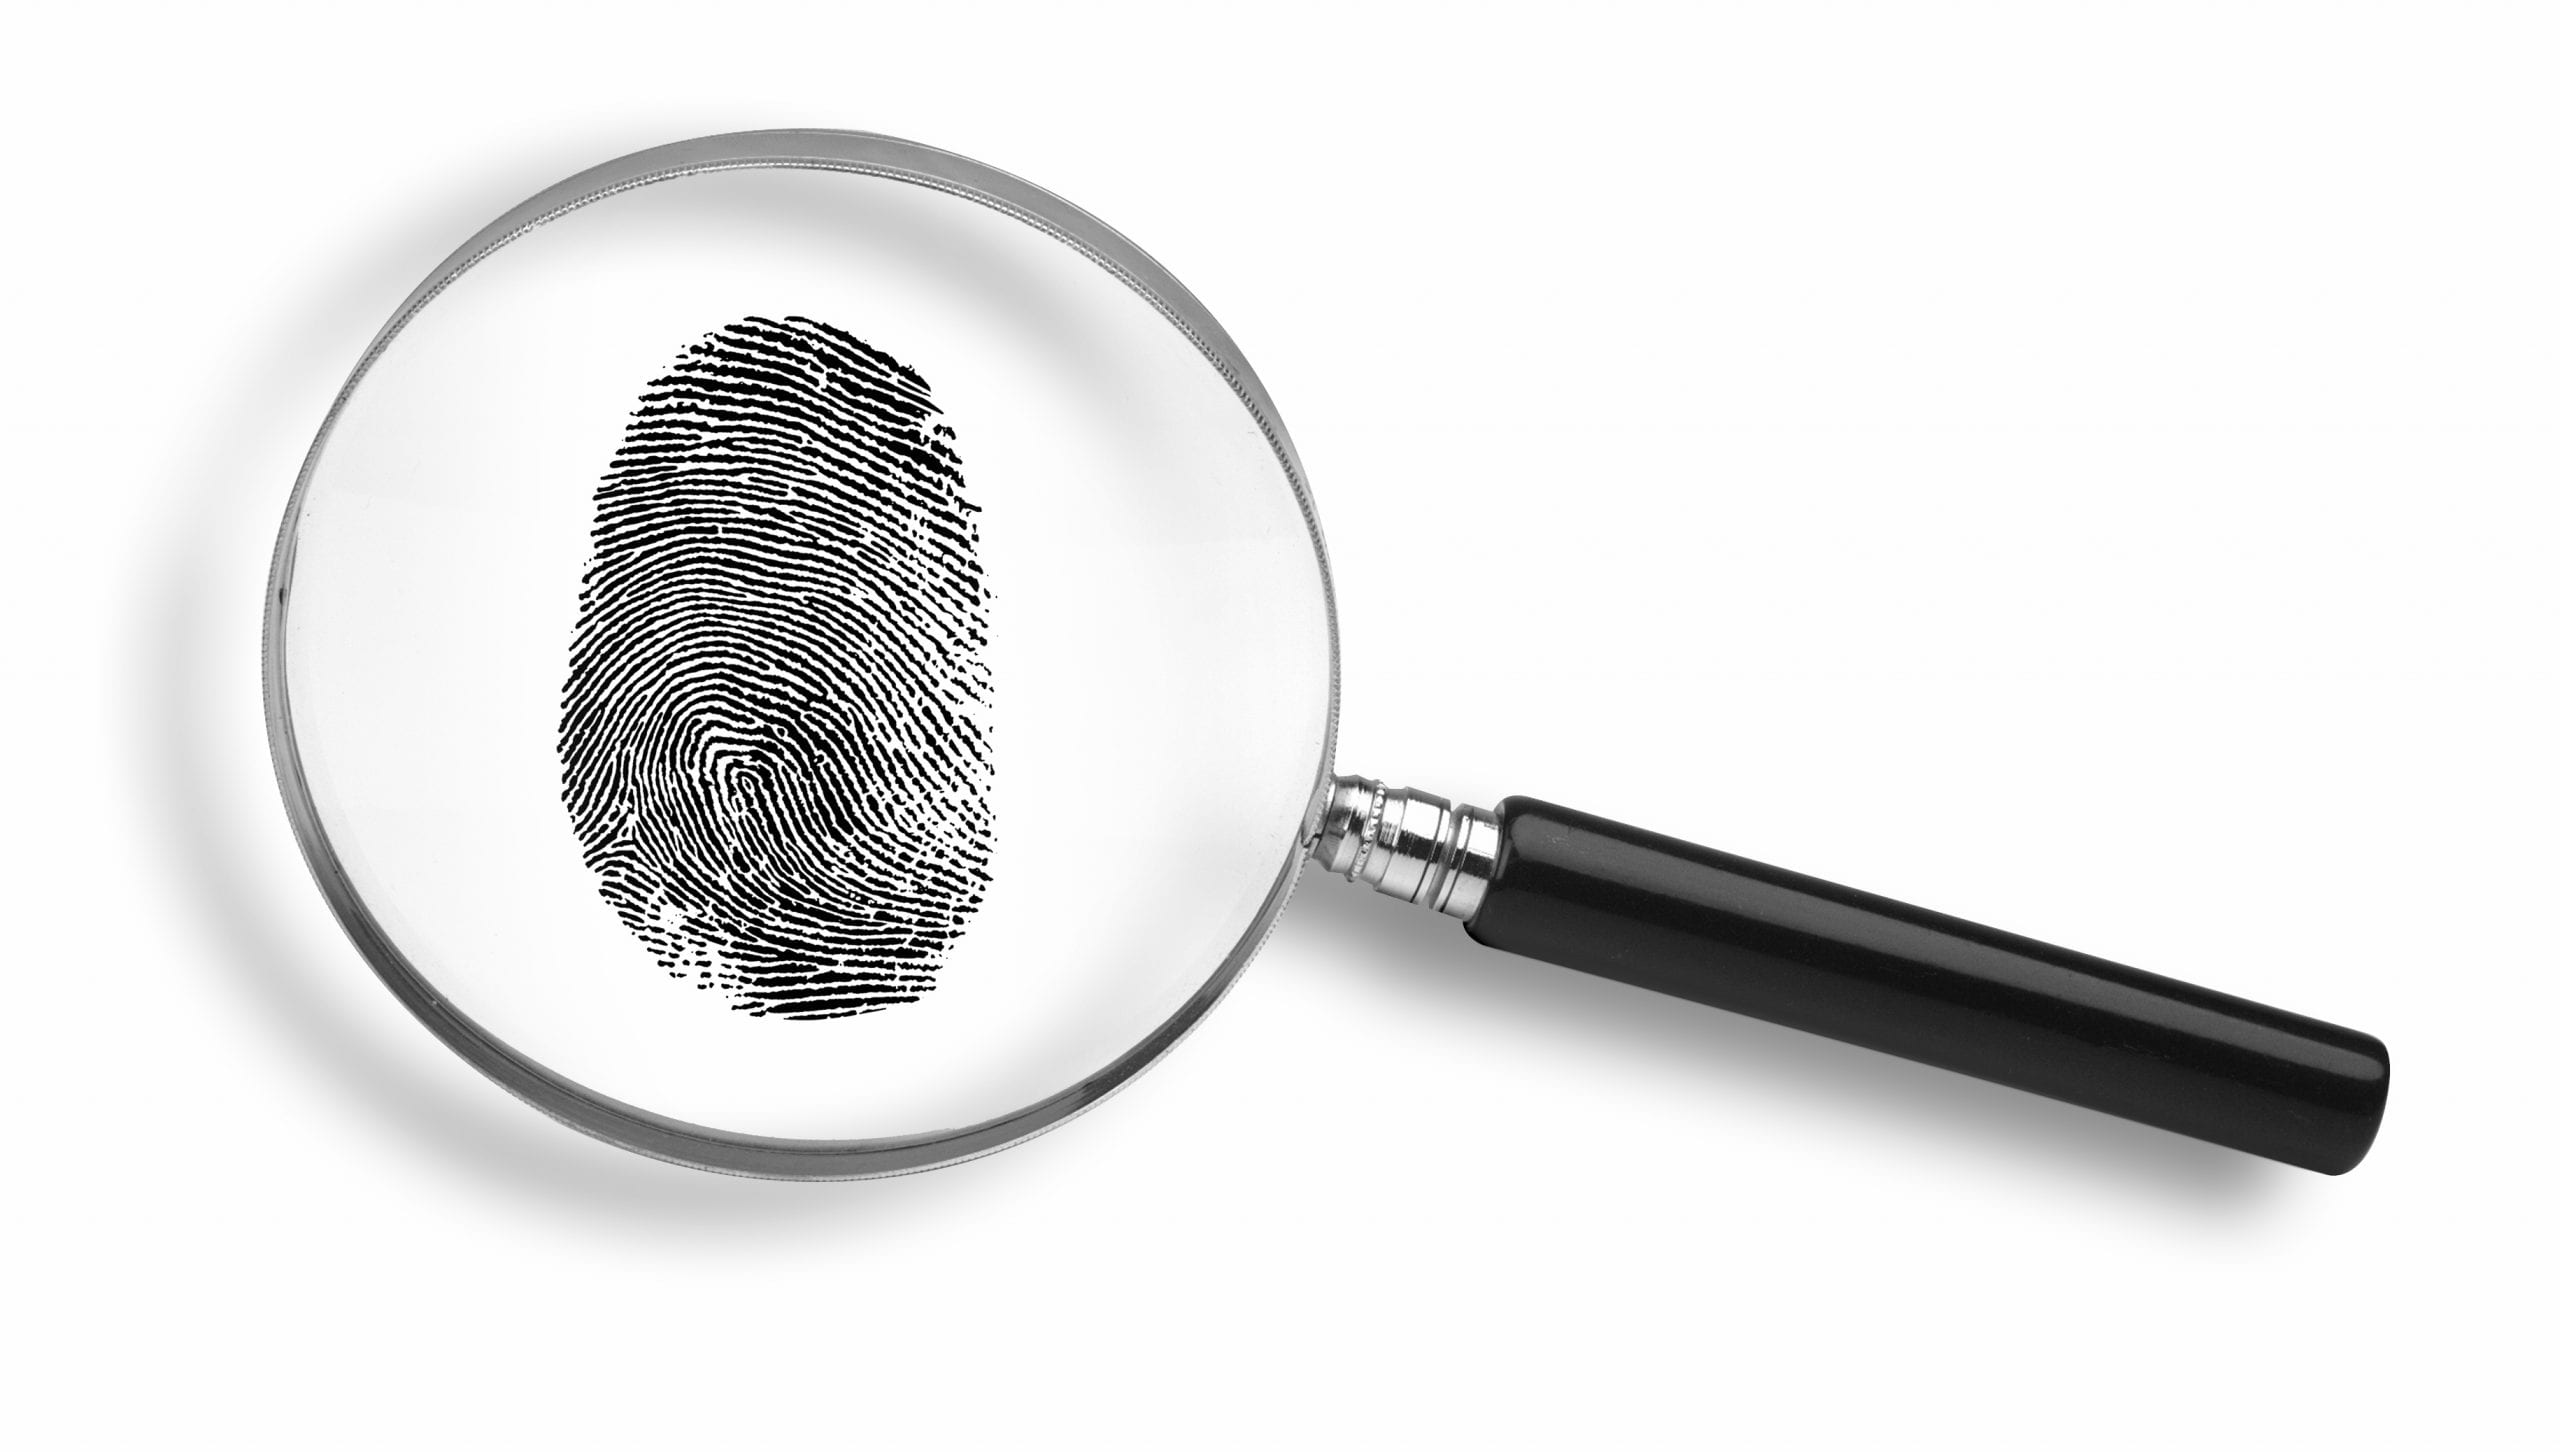 Magnifying glass and thumb print on white background.